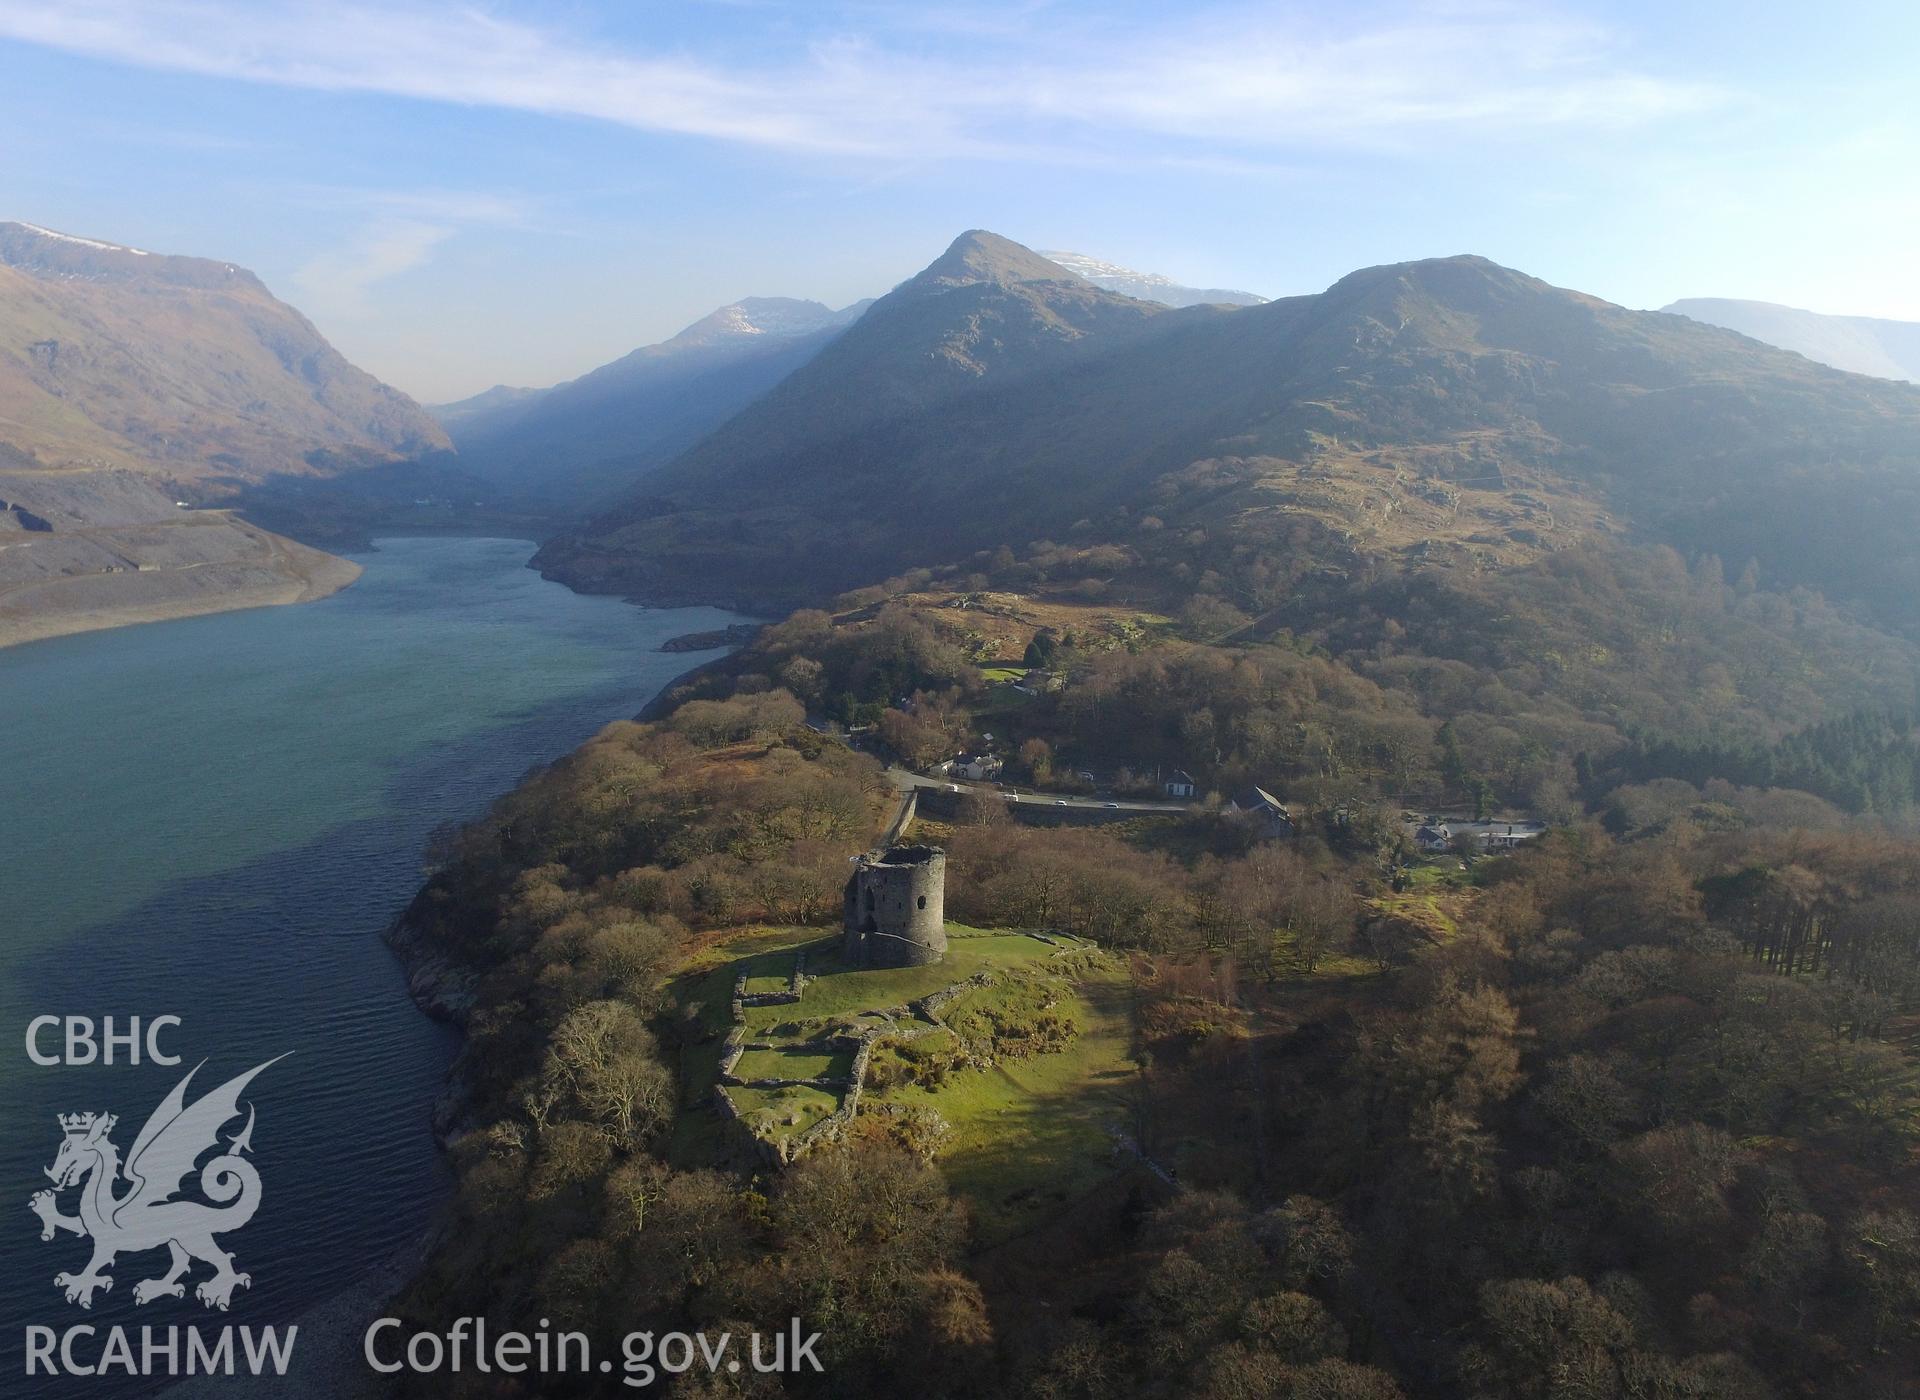 Colour photo showing view of Dolbadarn Castle, taken by Paul R. Davis, 9th March 2018.